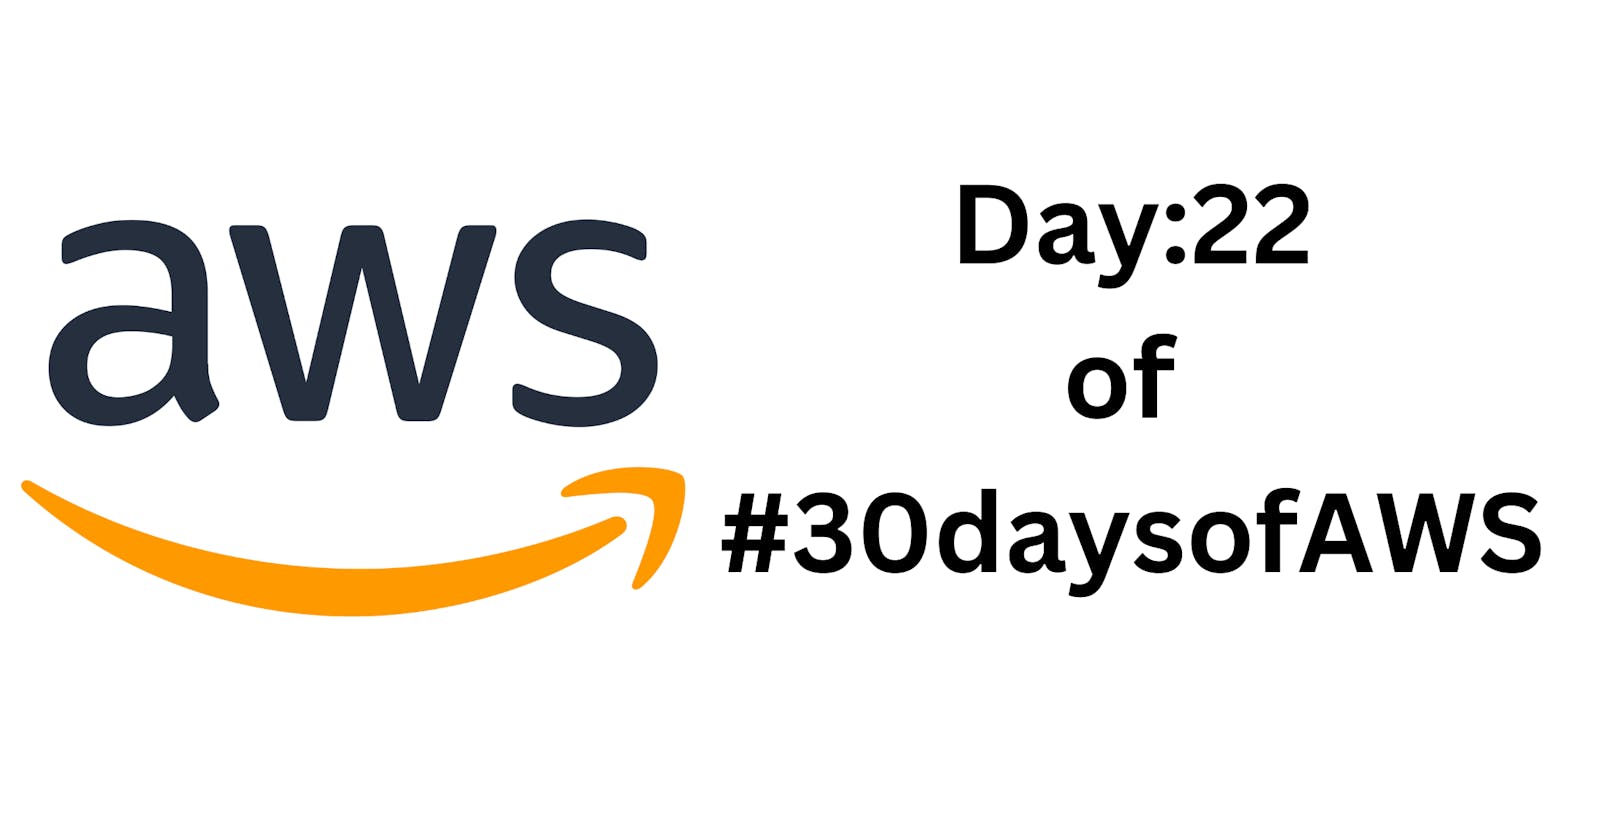 Day 22 of 30 Days of #AWS: Unveiling the Secrets of AWS Secret Management 🤫